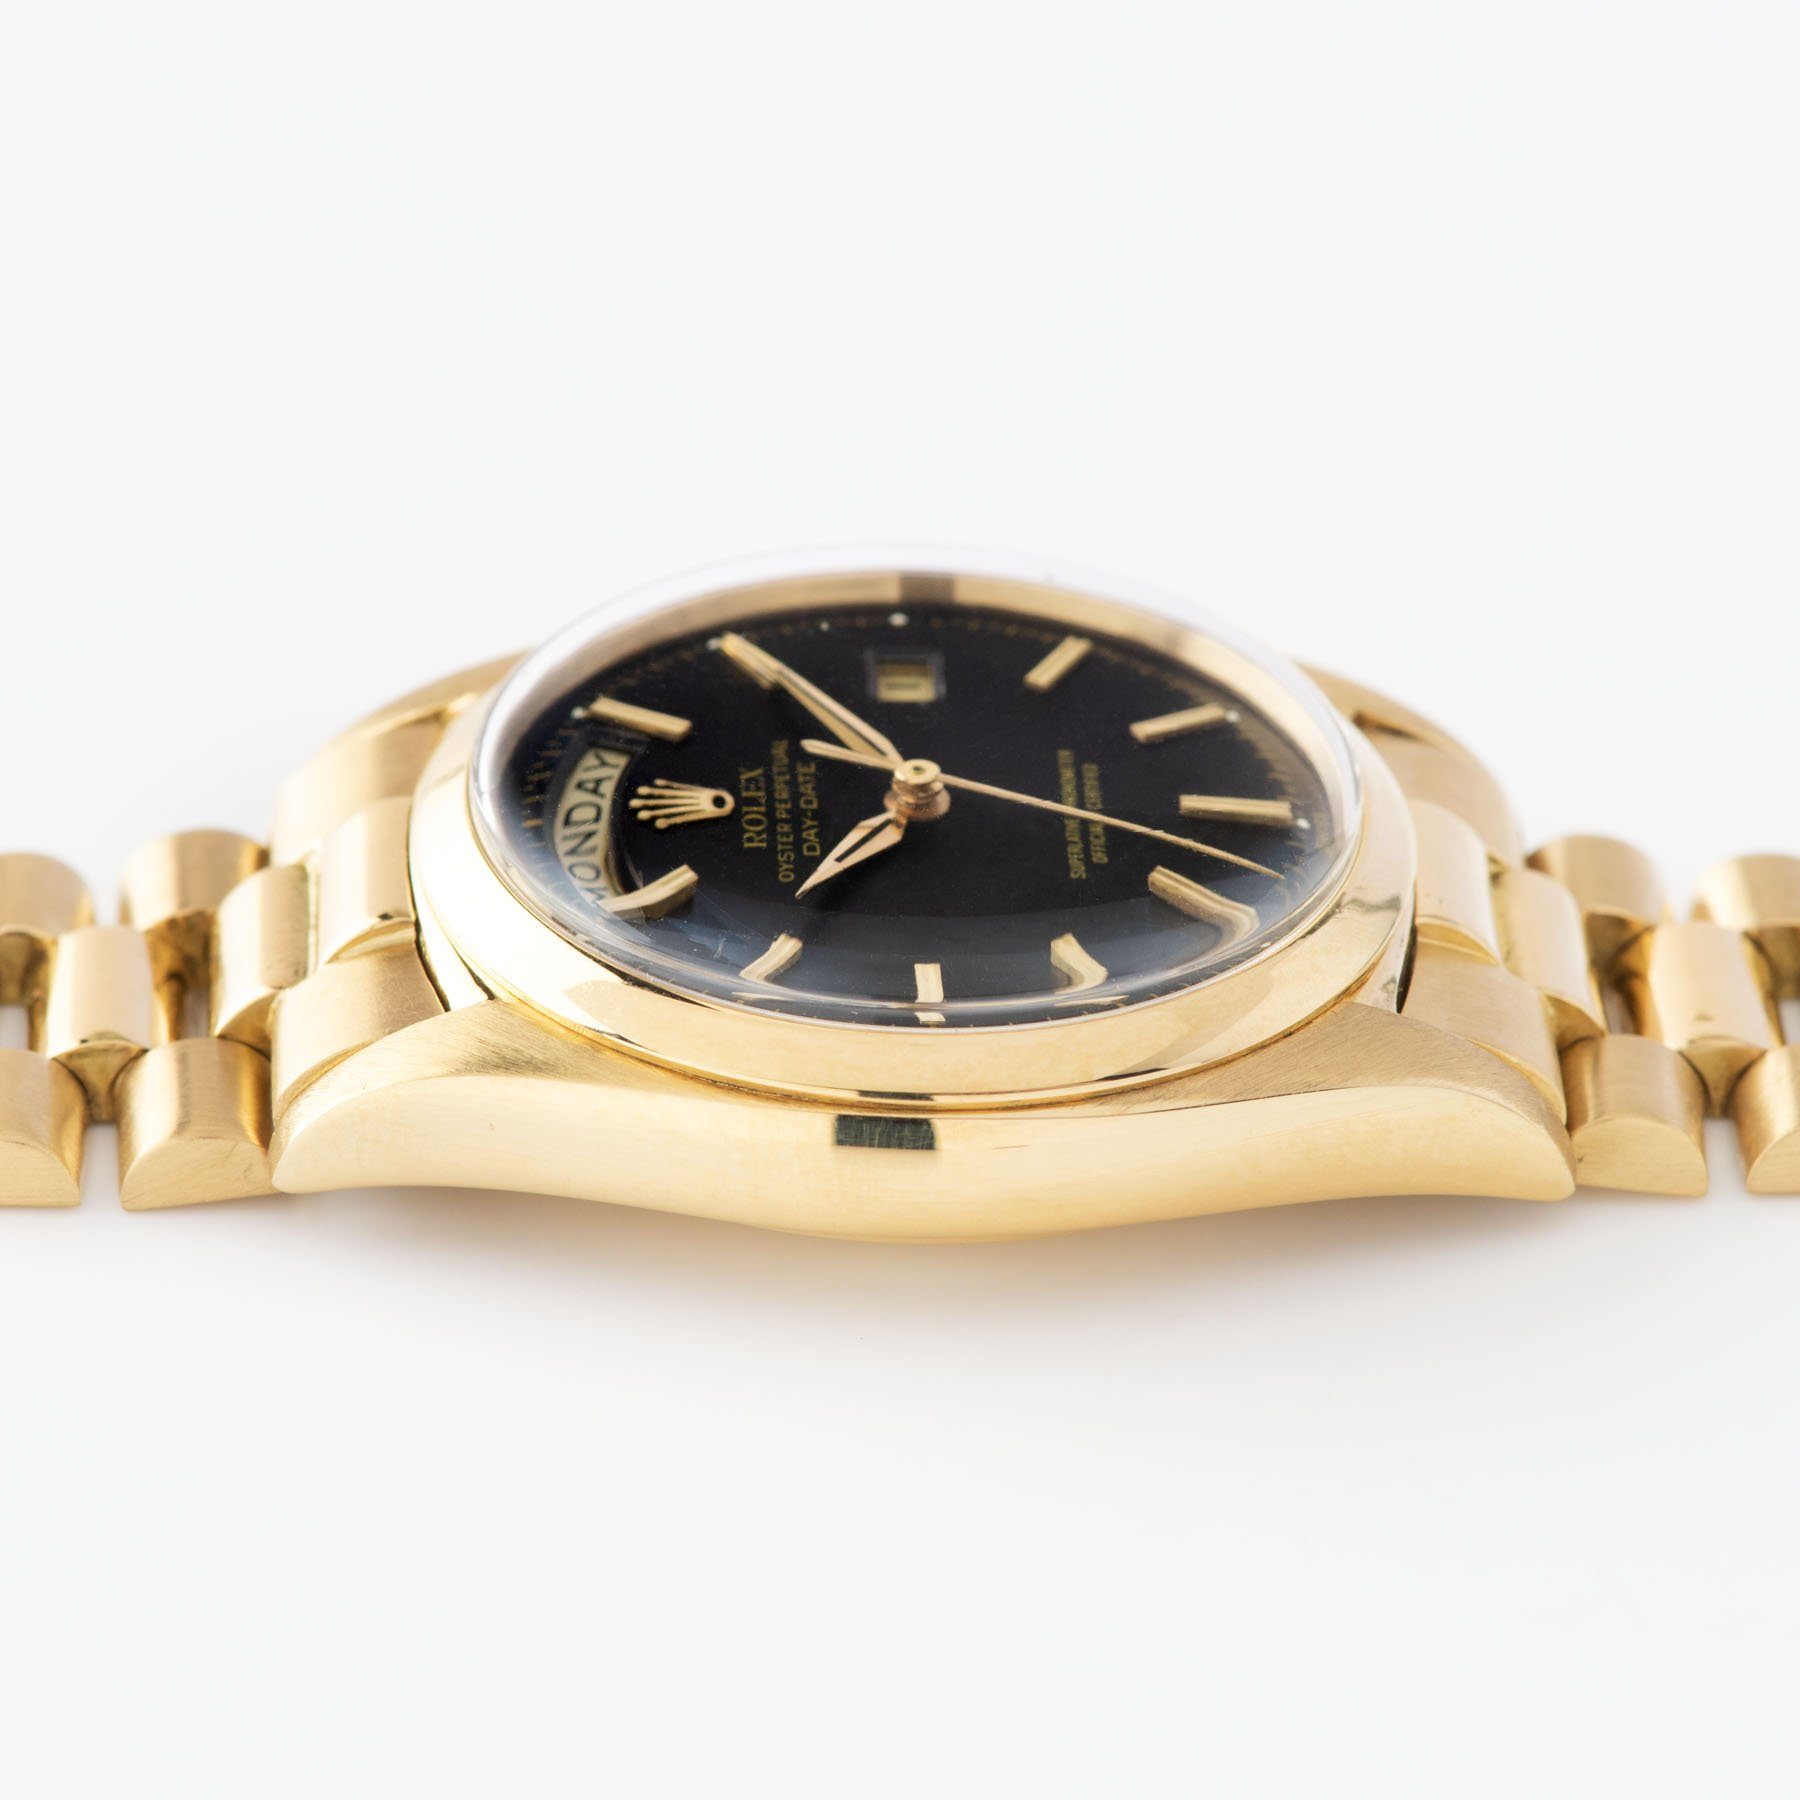 Rolex Day-Date Yellow Gold Black Dial ref 1802